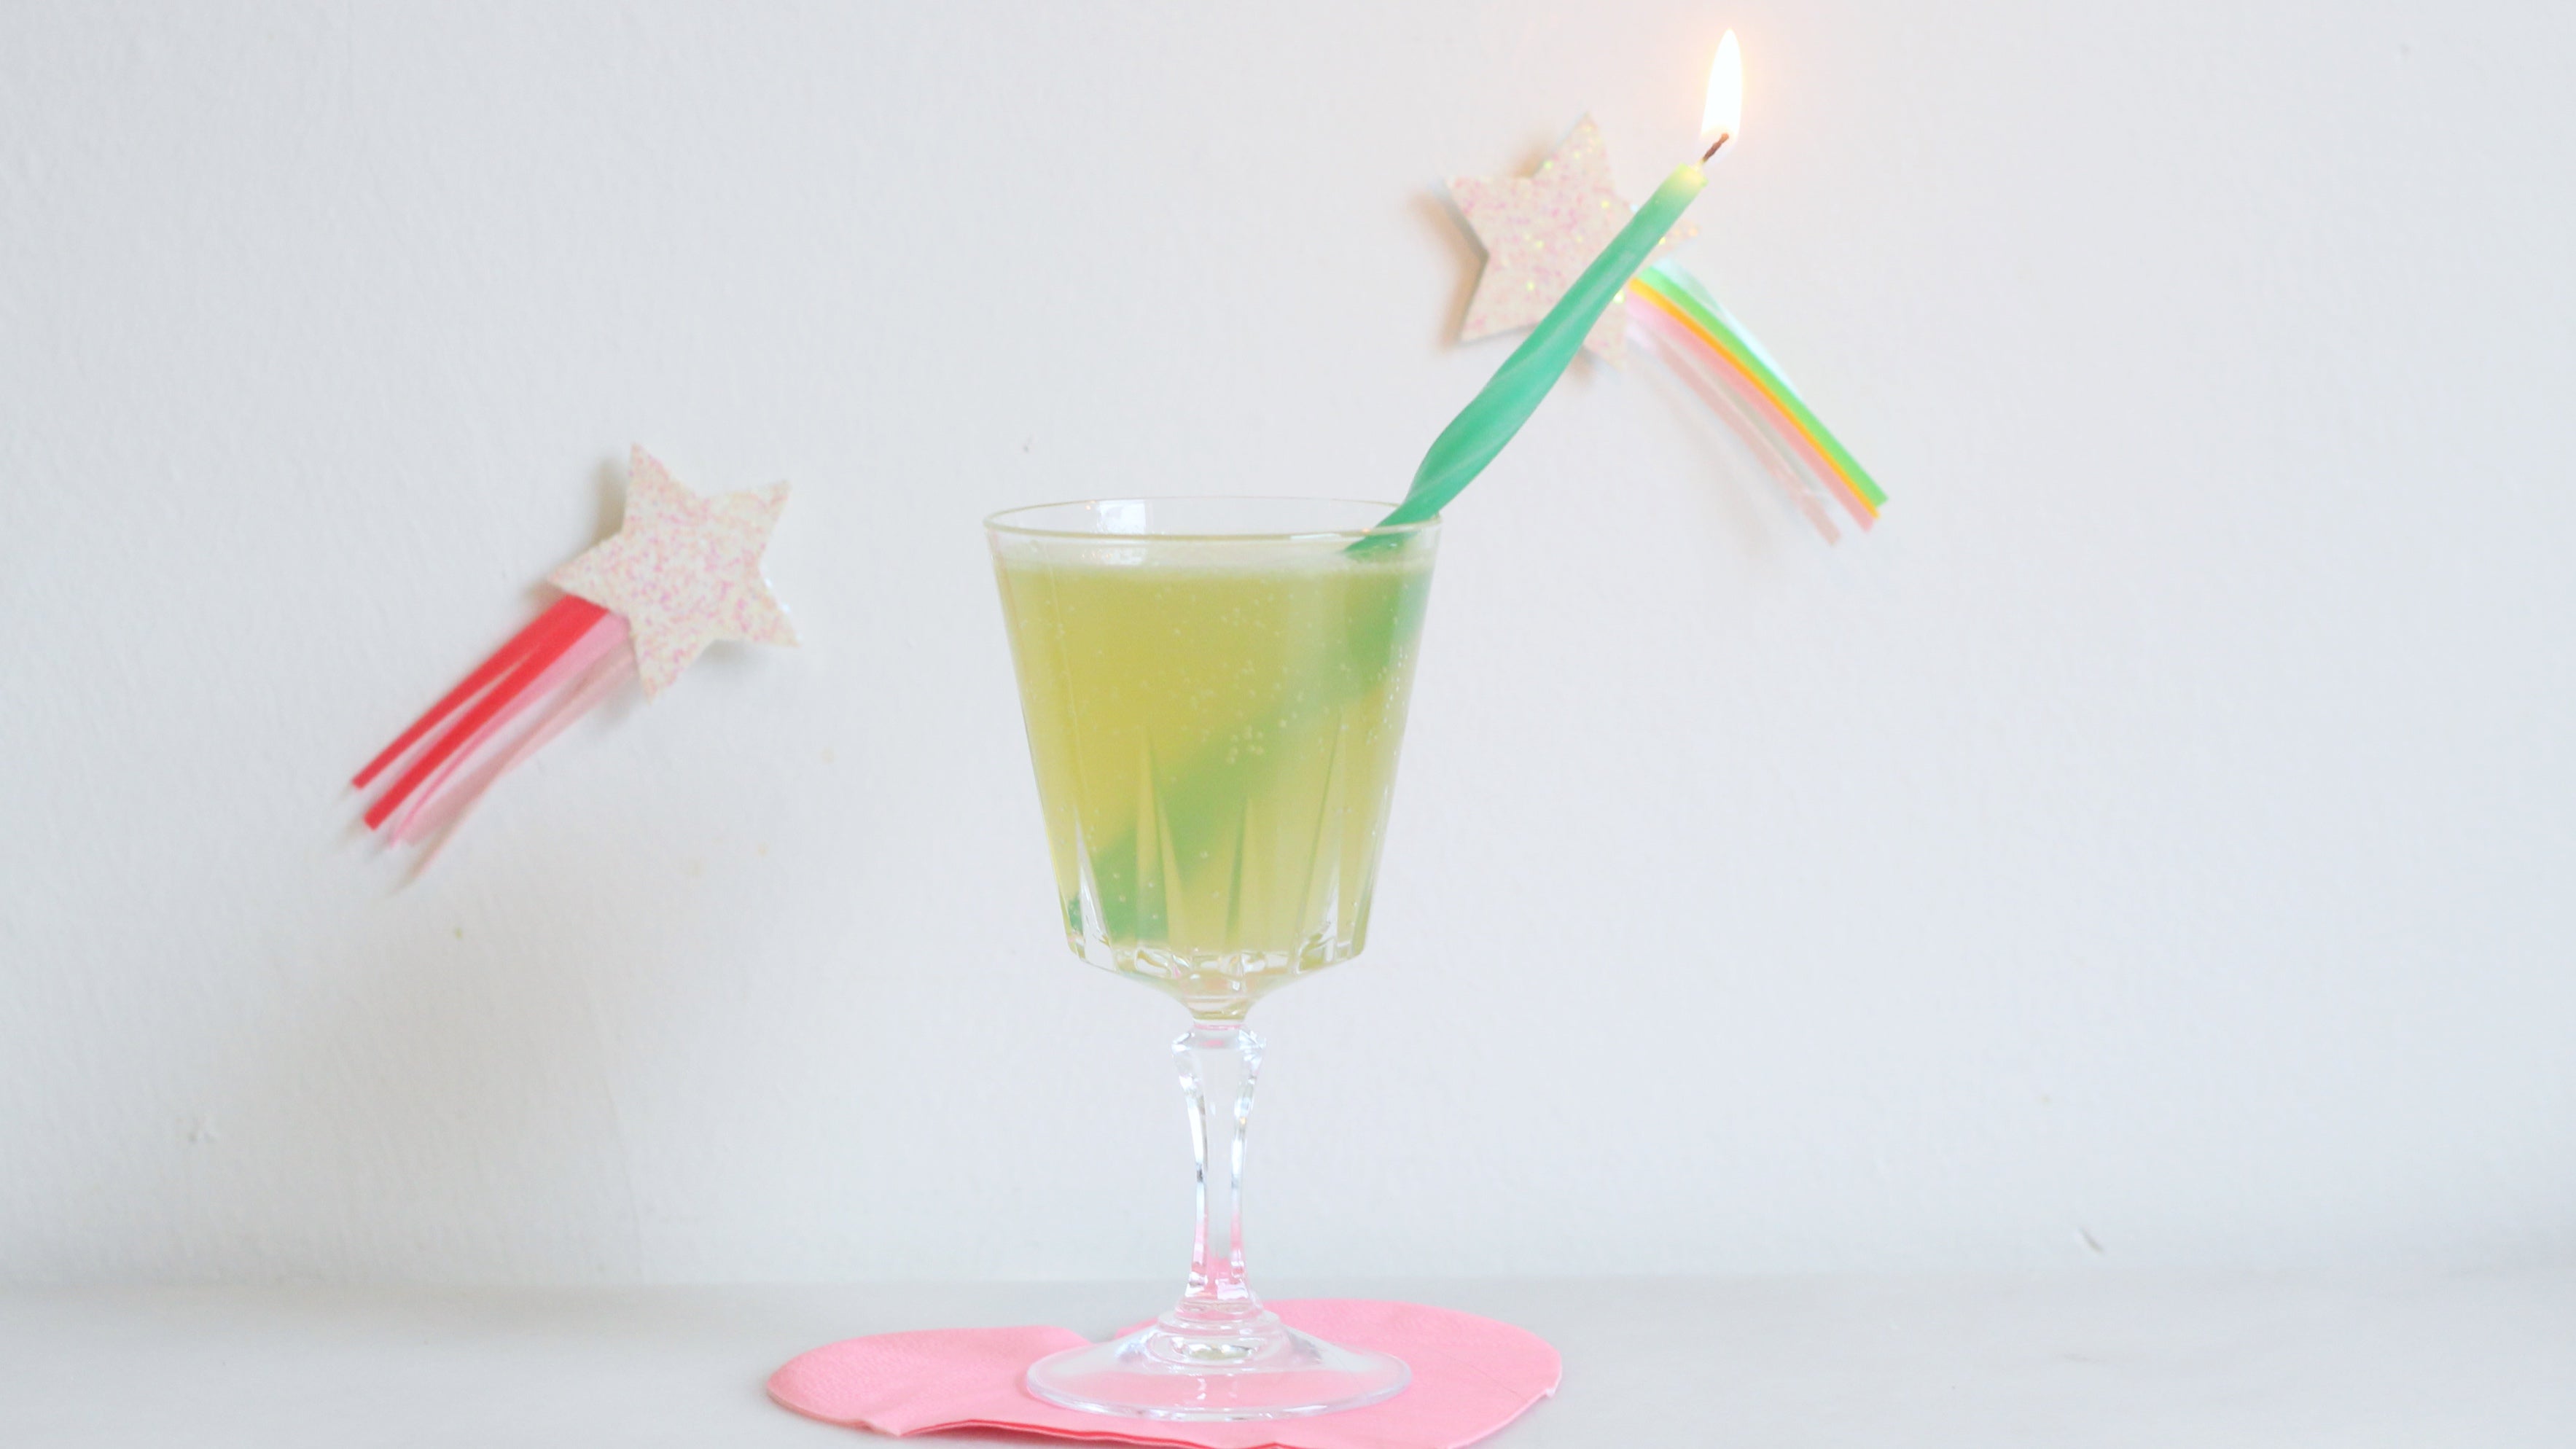 Celebrate Lifehacker’s 15th Birthday With This Chartreuse Cocktail